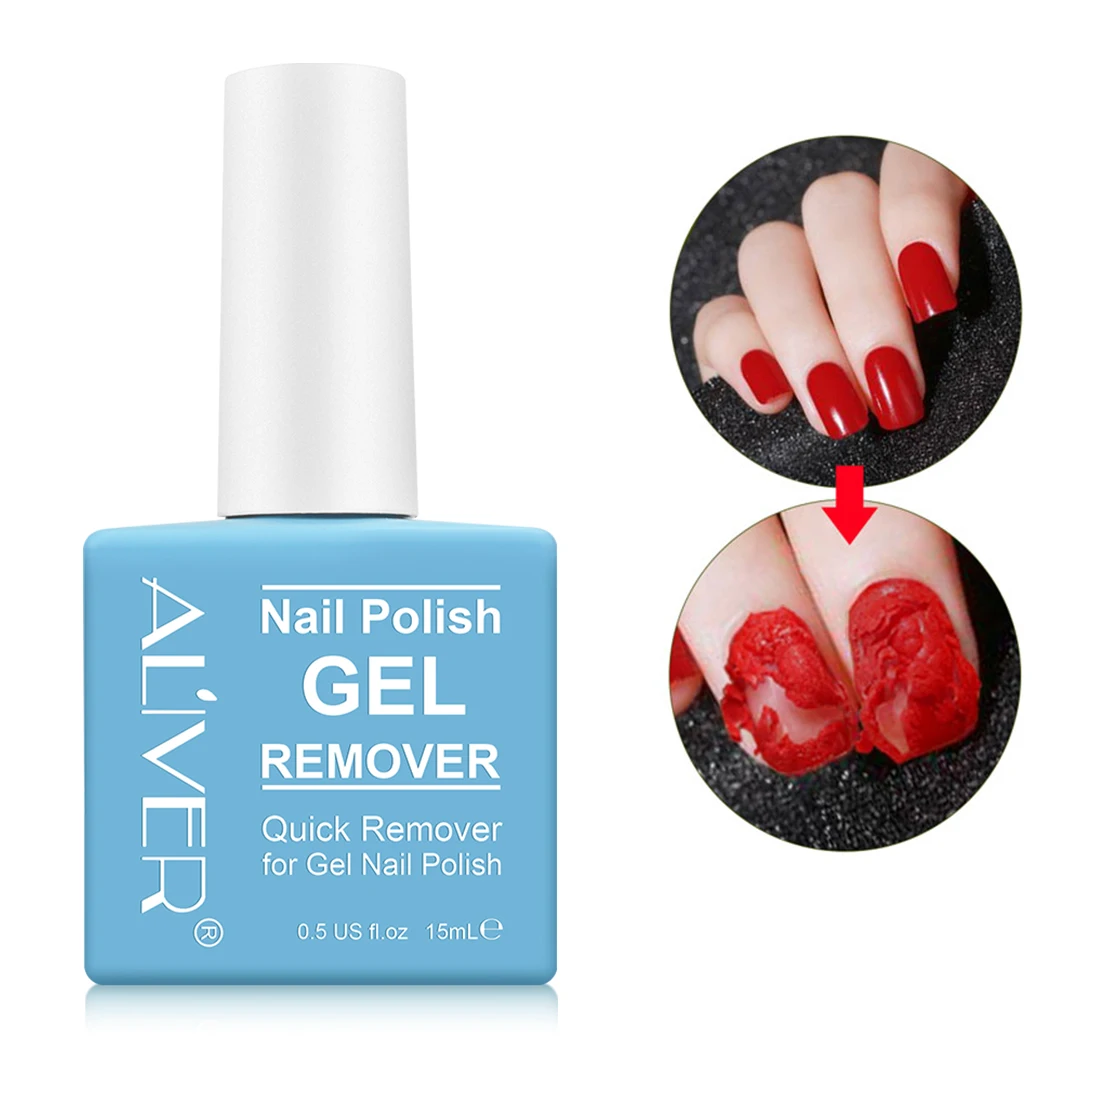 
Magic nail polish remover that quickly and easily removes nail gel in 3 5 minutes  (1600130814245)